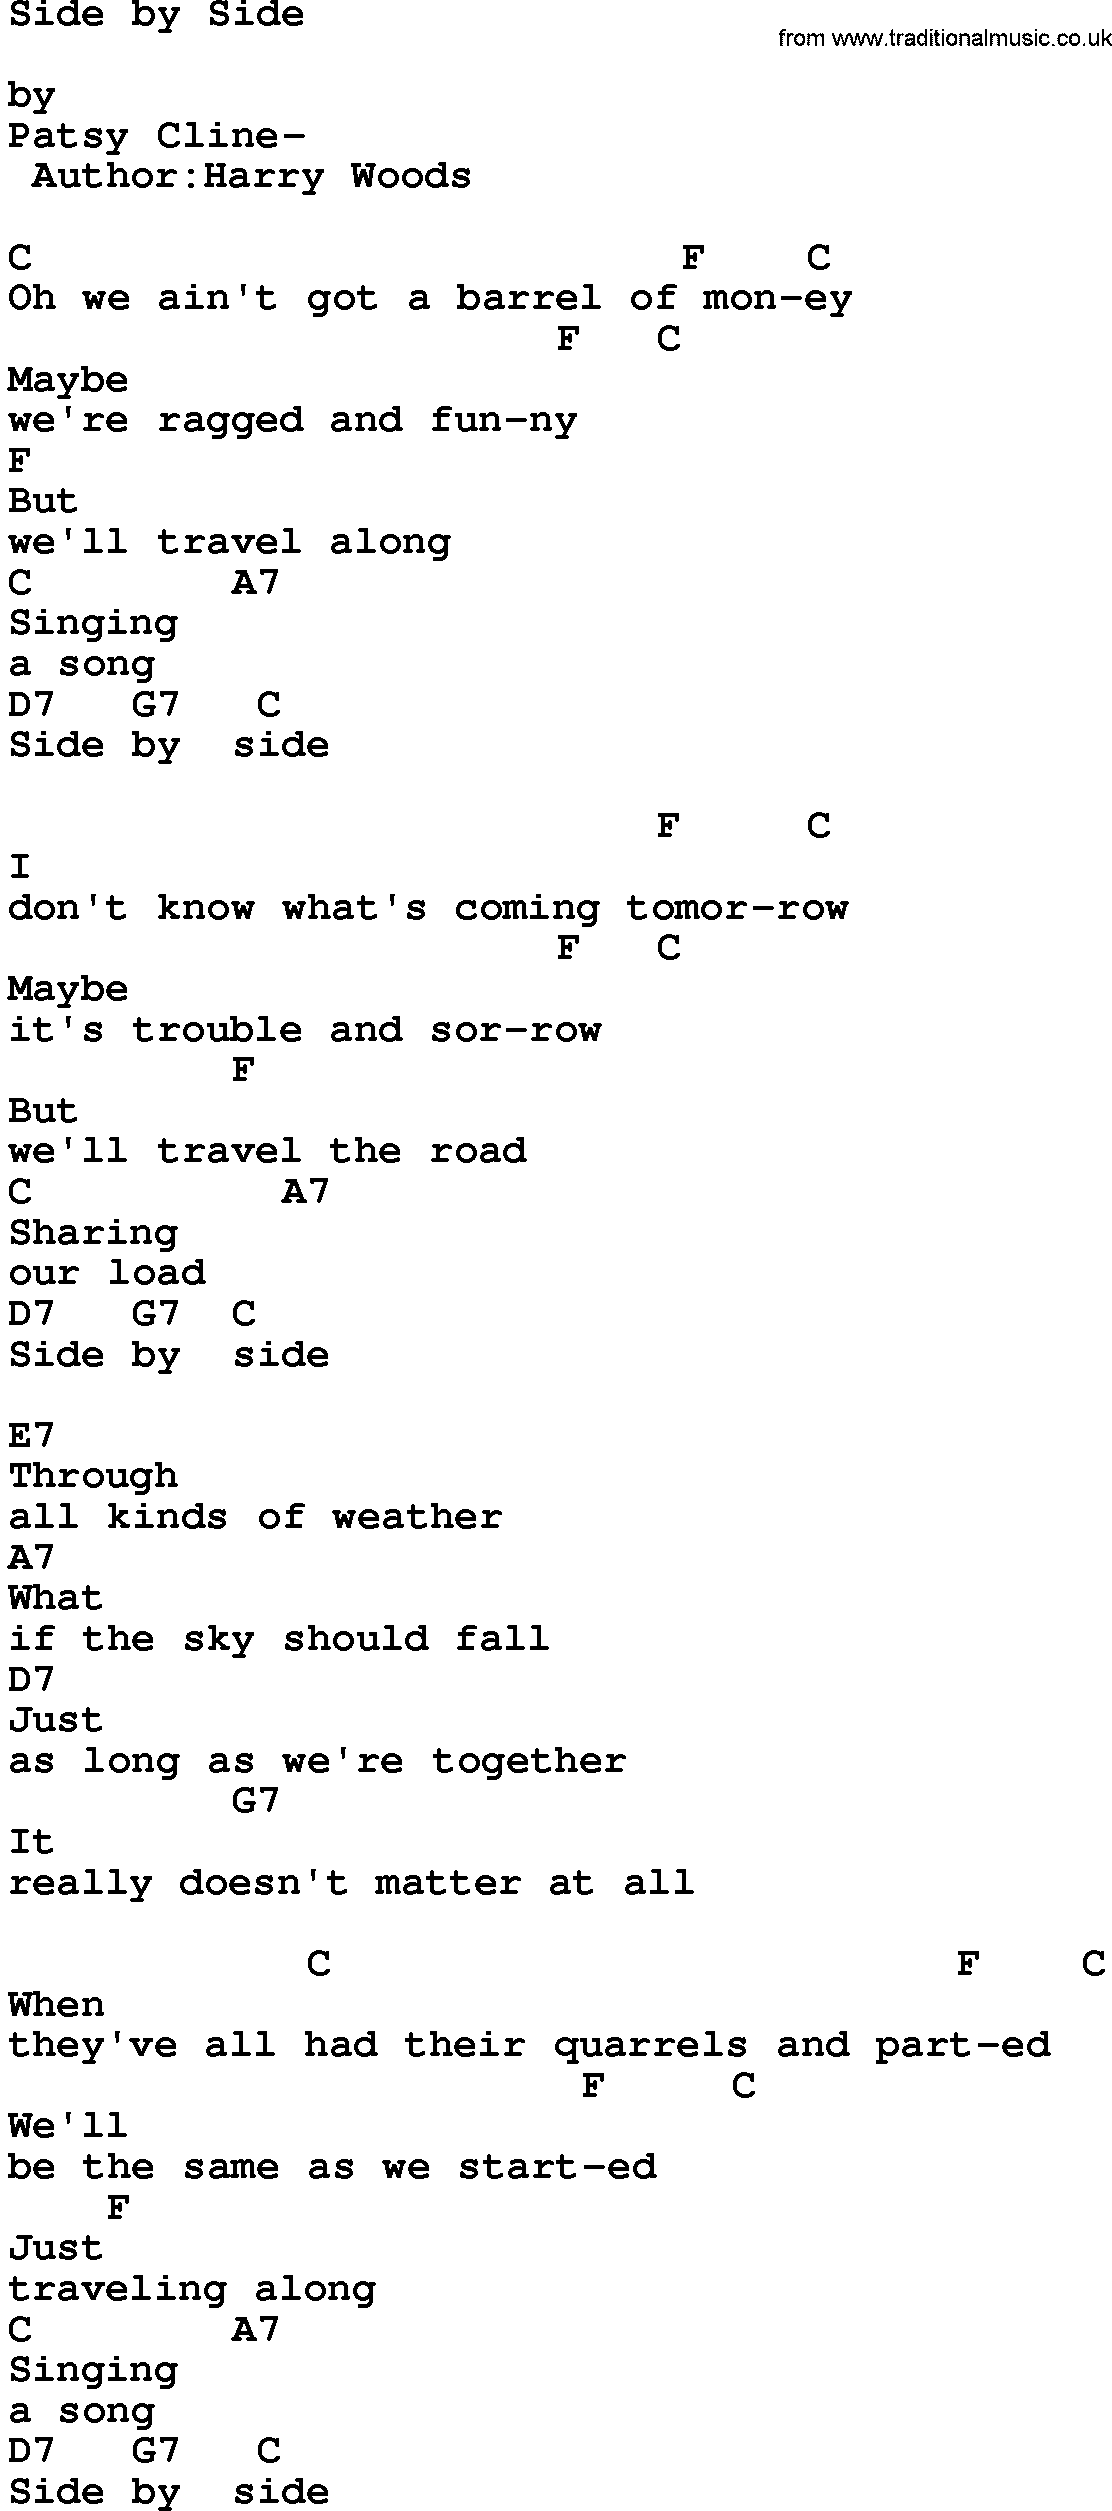 Country music song: Side By Side lyrics and chords